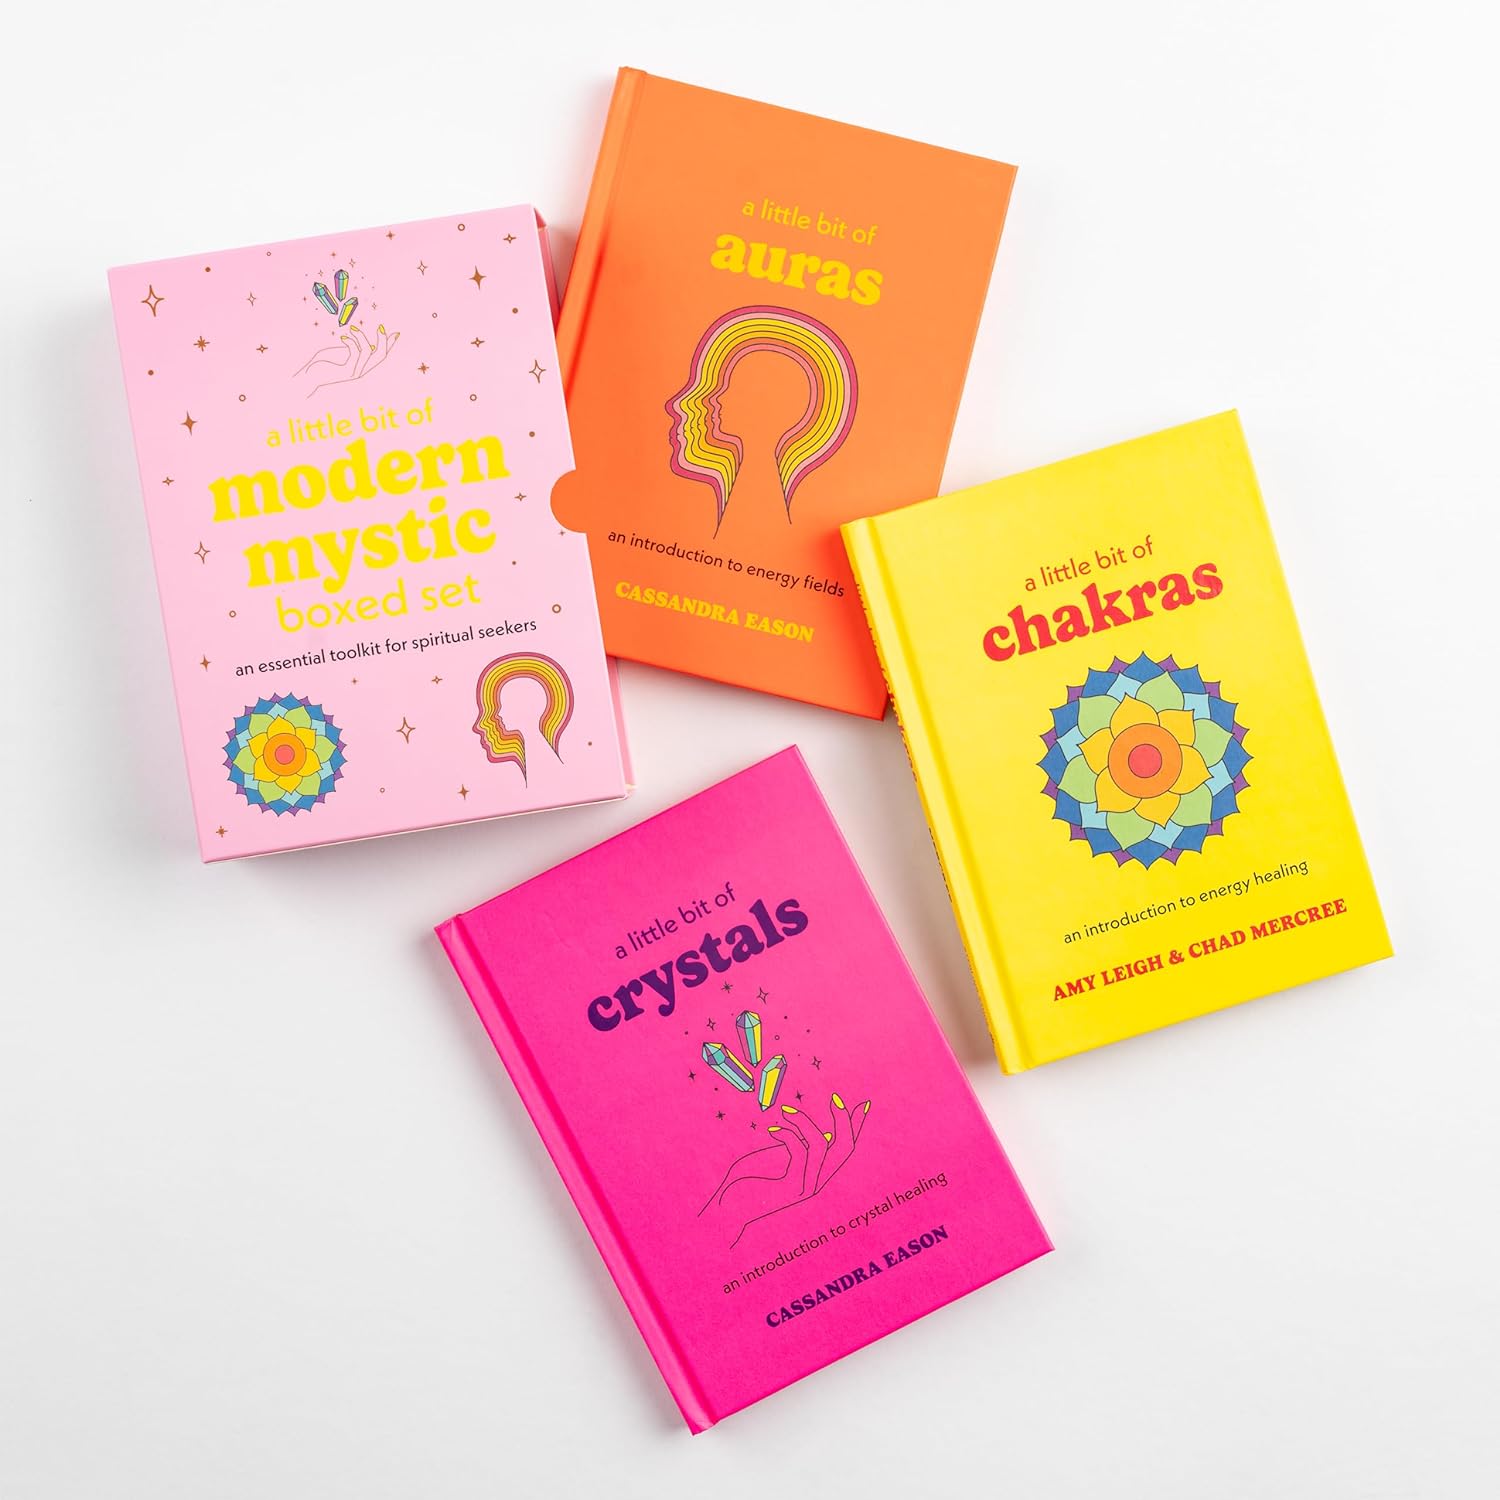 A Little Bit of Modern Mystic Boxed Set: An Essential Toolkit for Spiritual Seekers